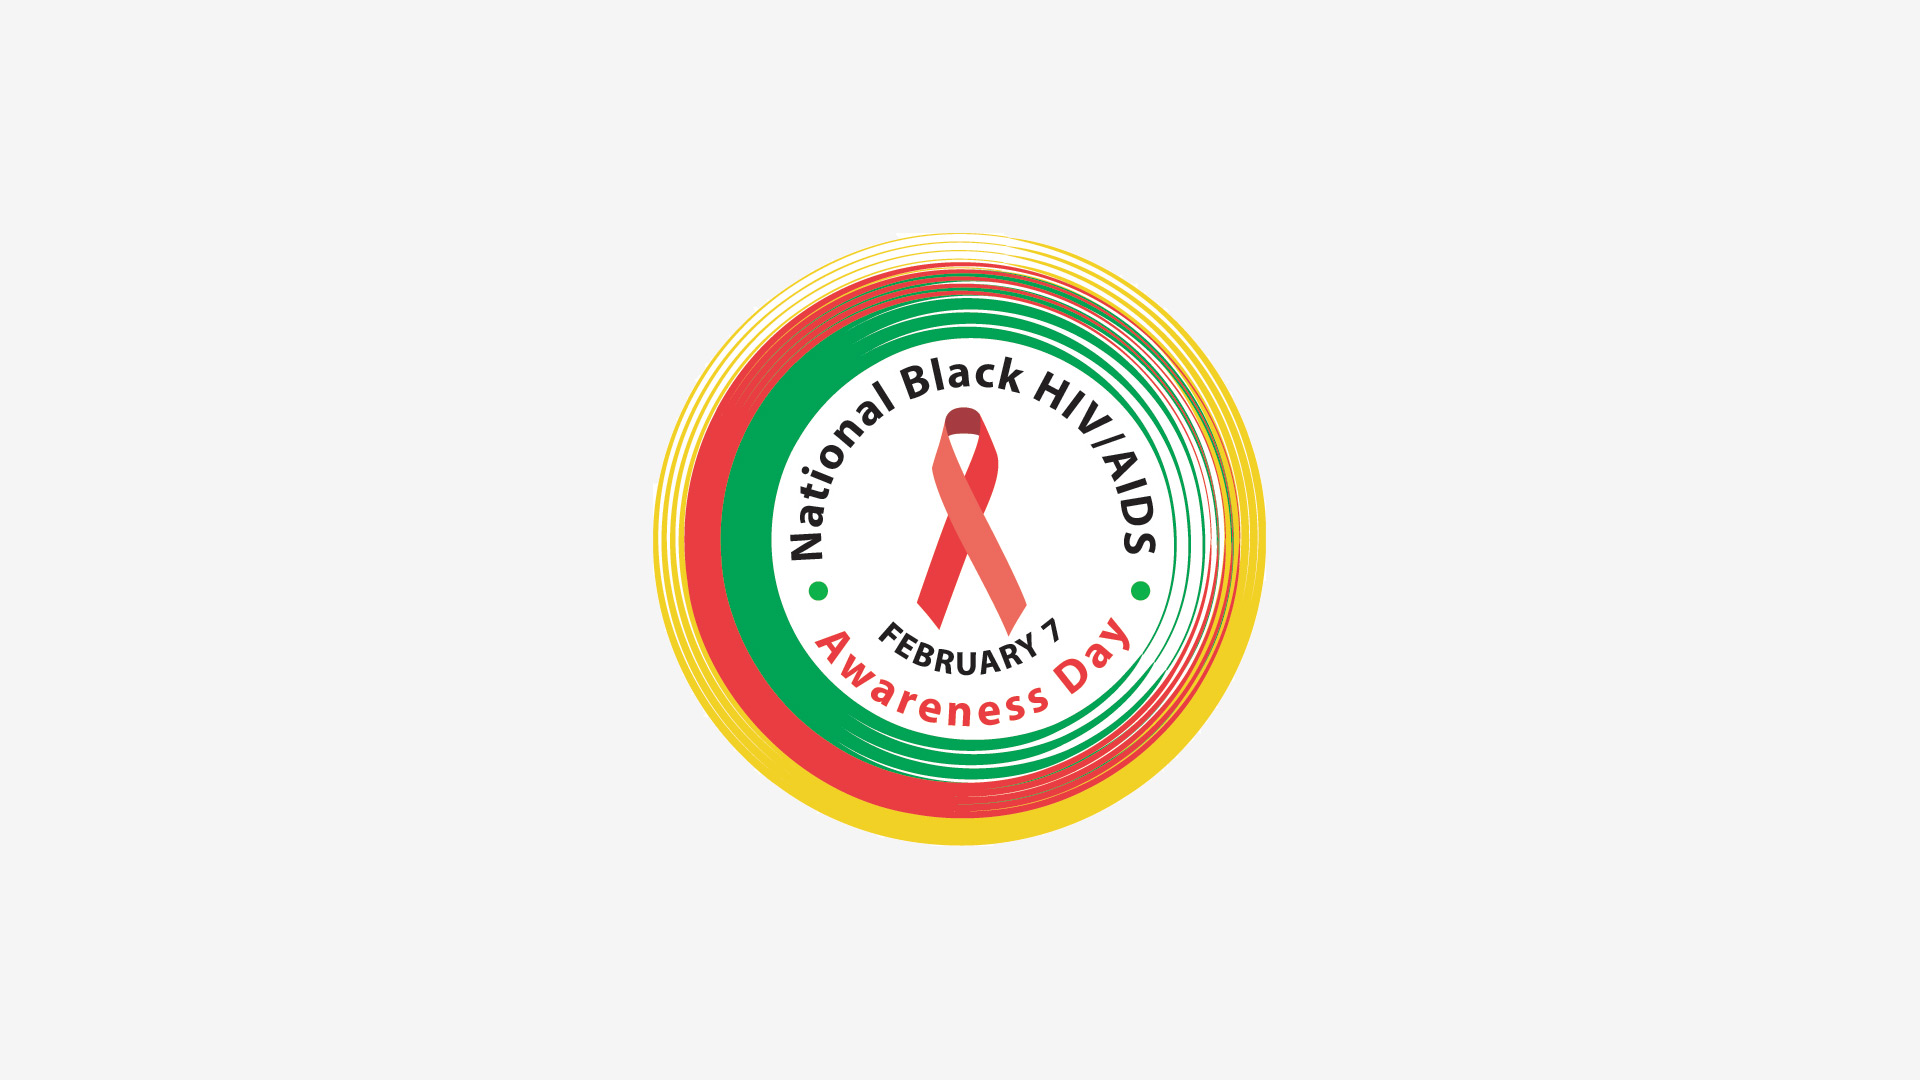 February 7 is National Black HIV/AIDS Awareness Day 2022 overview image